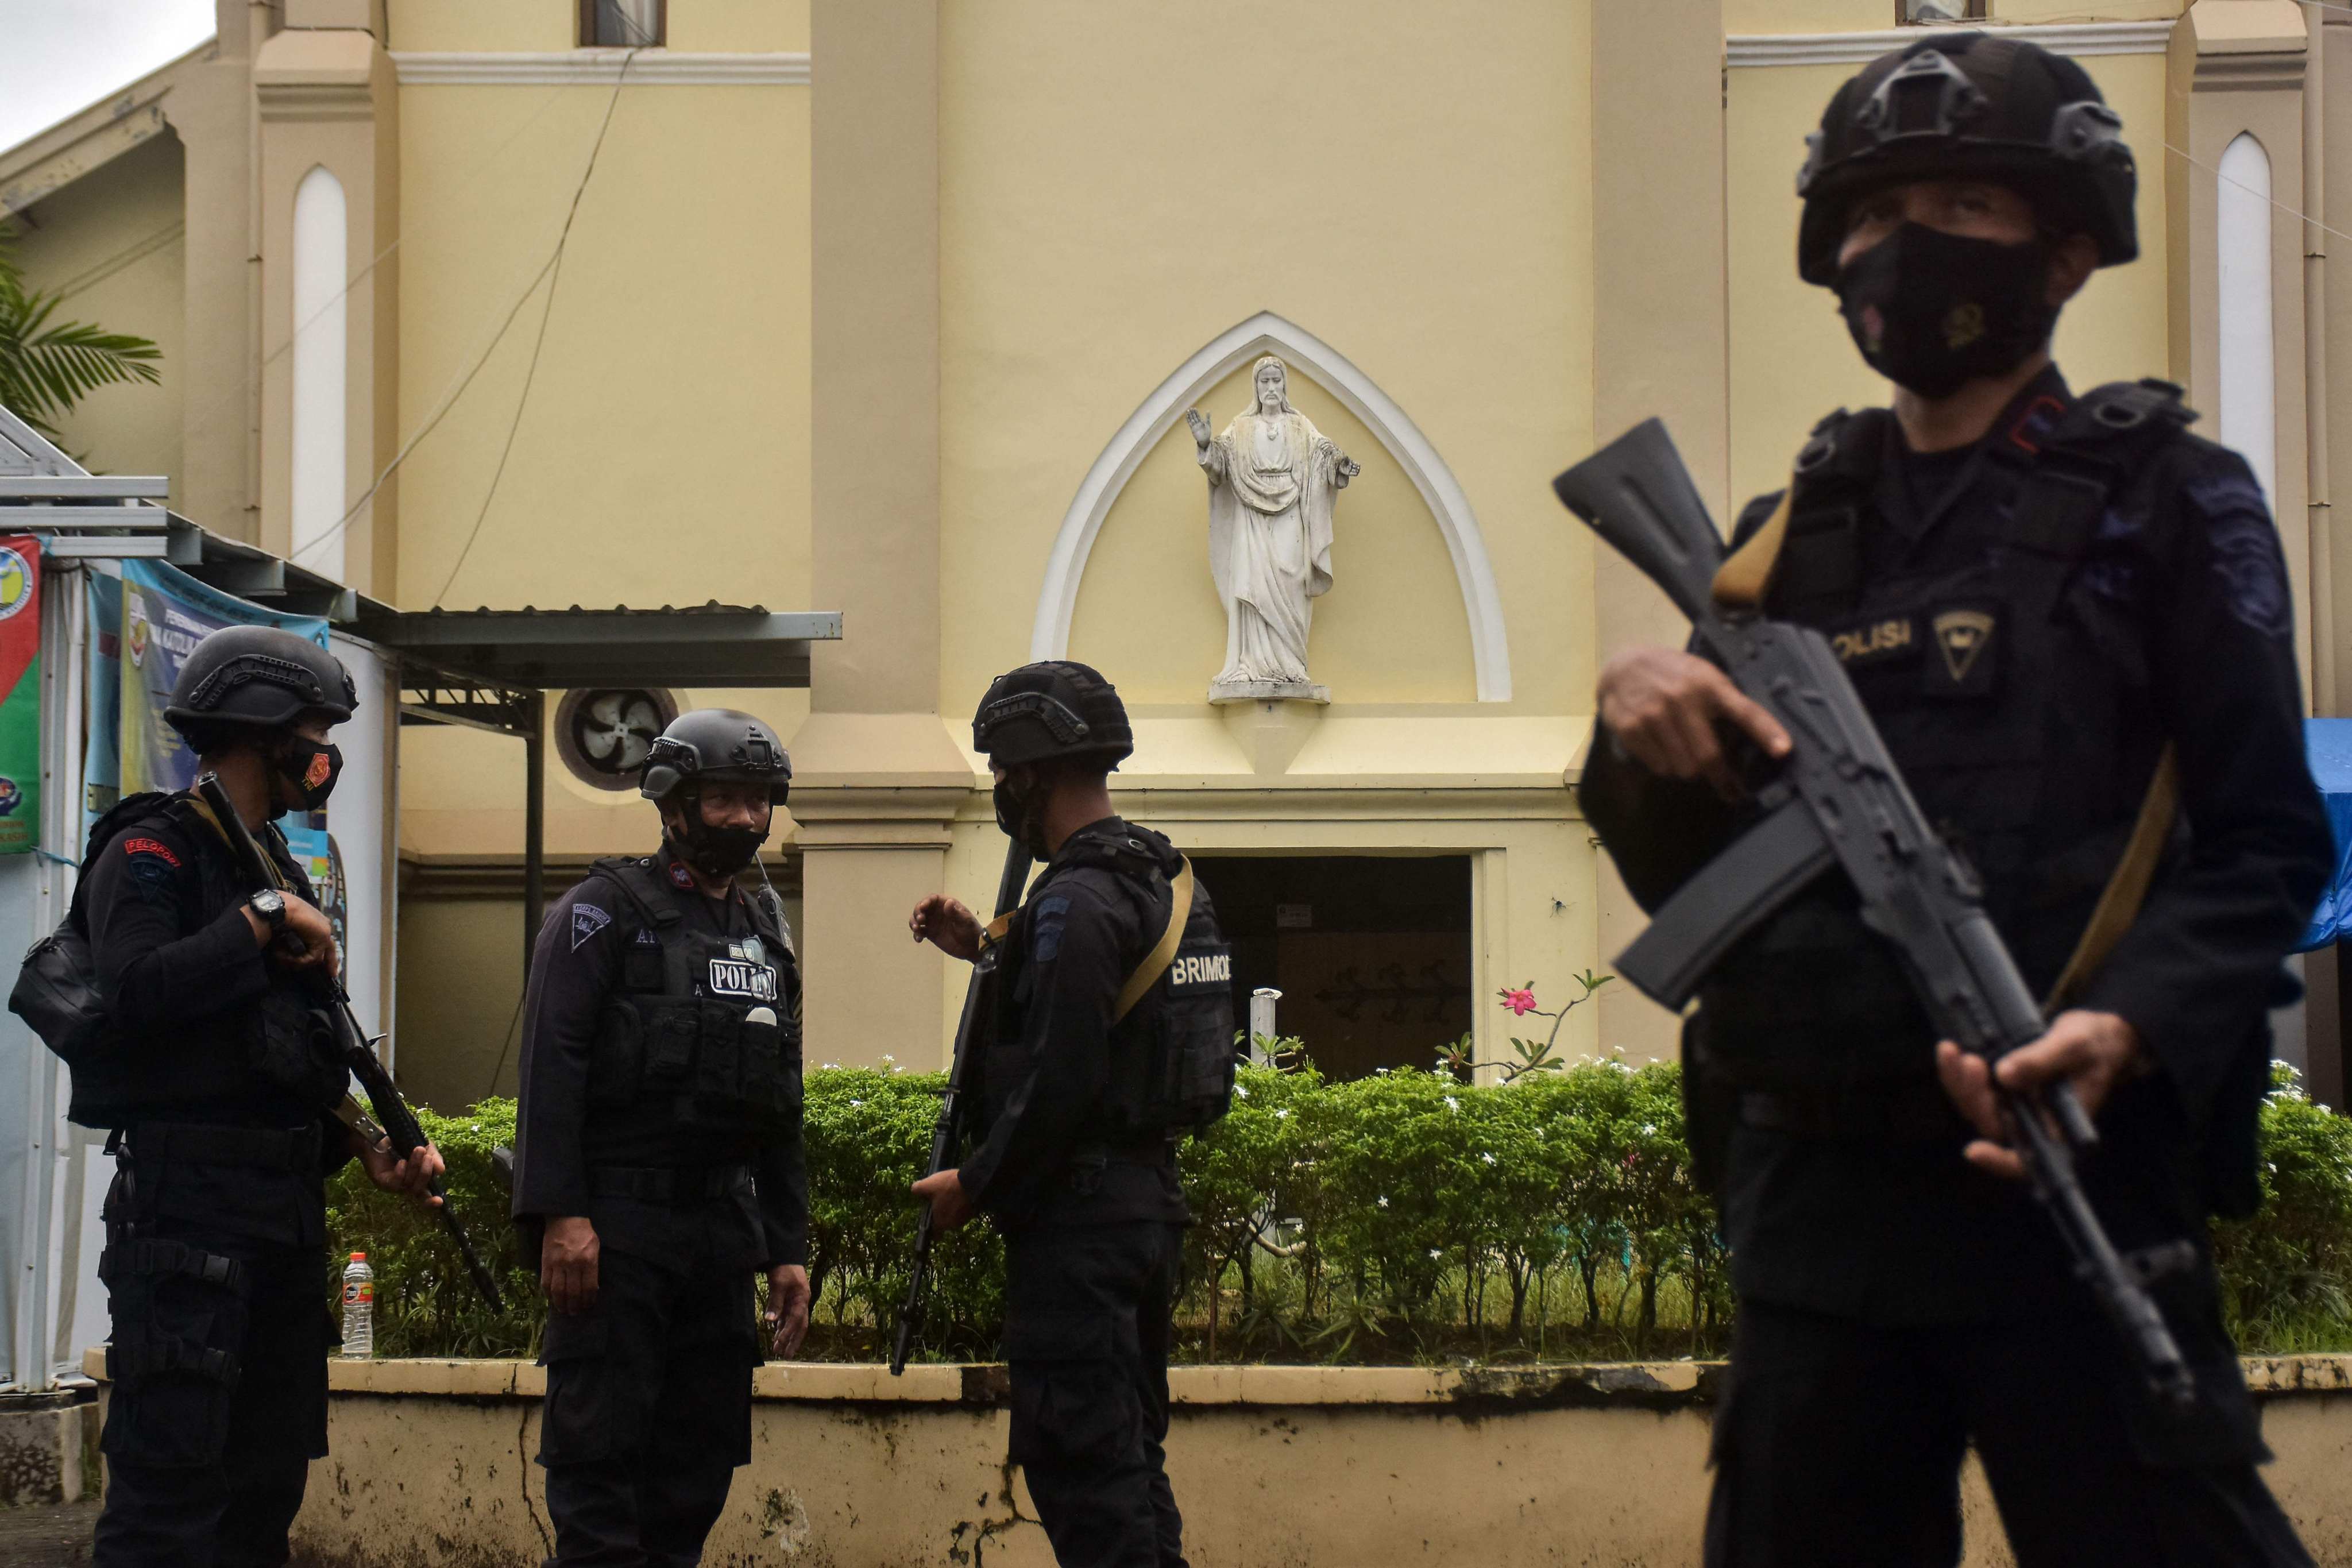 A special police team beefs up security at a cathedral in Makassar in March 2021, following an earlier suicide bombing. AFP